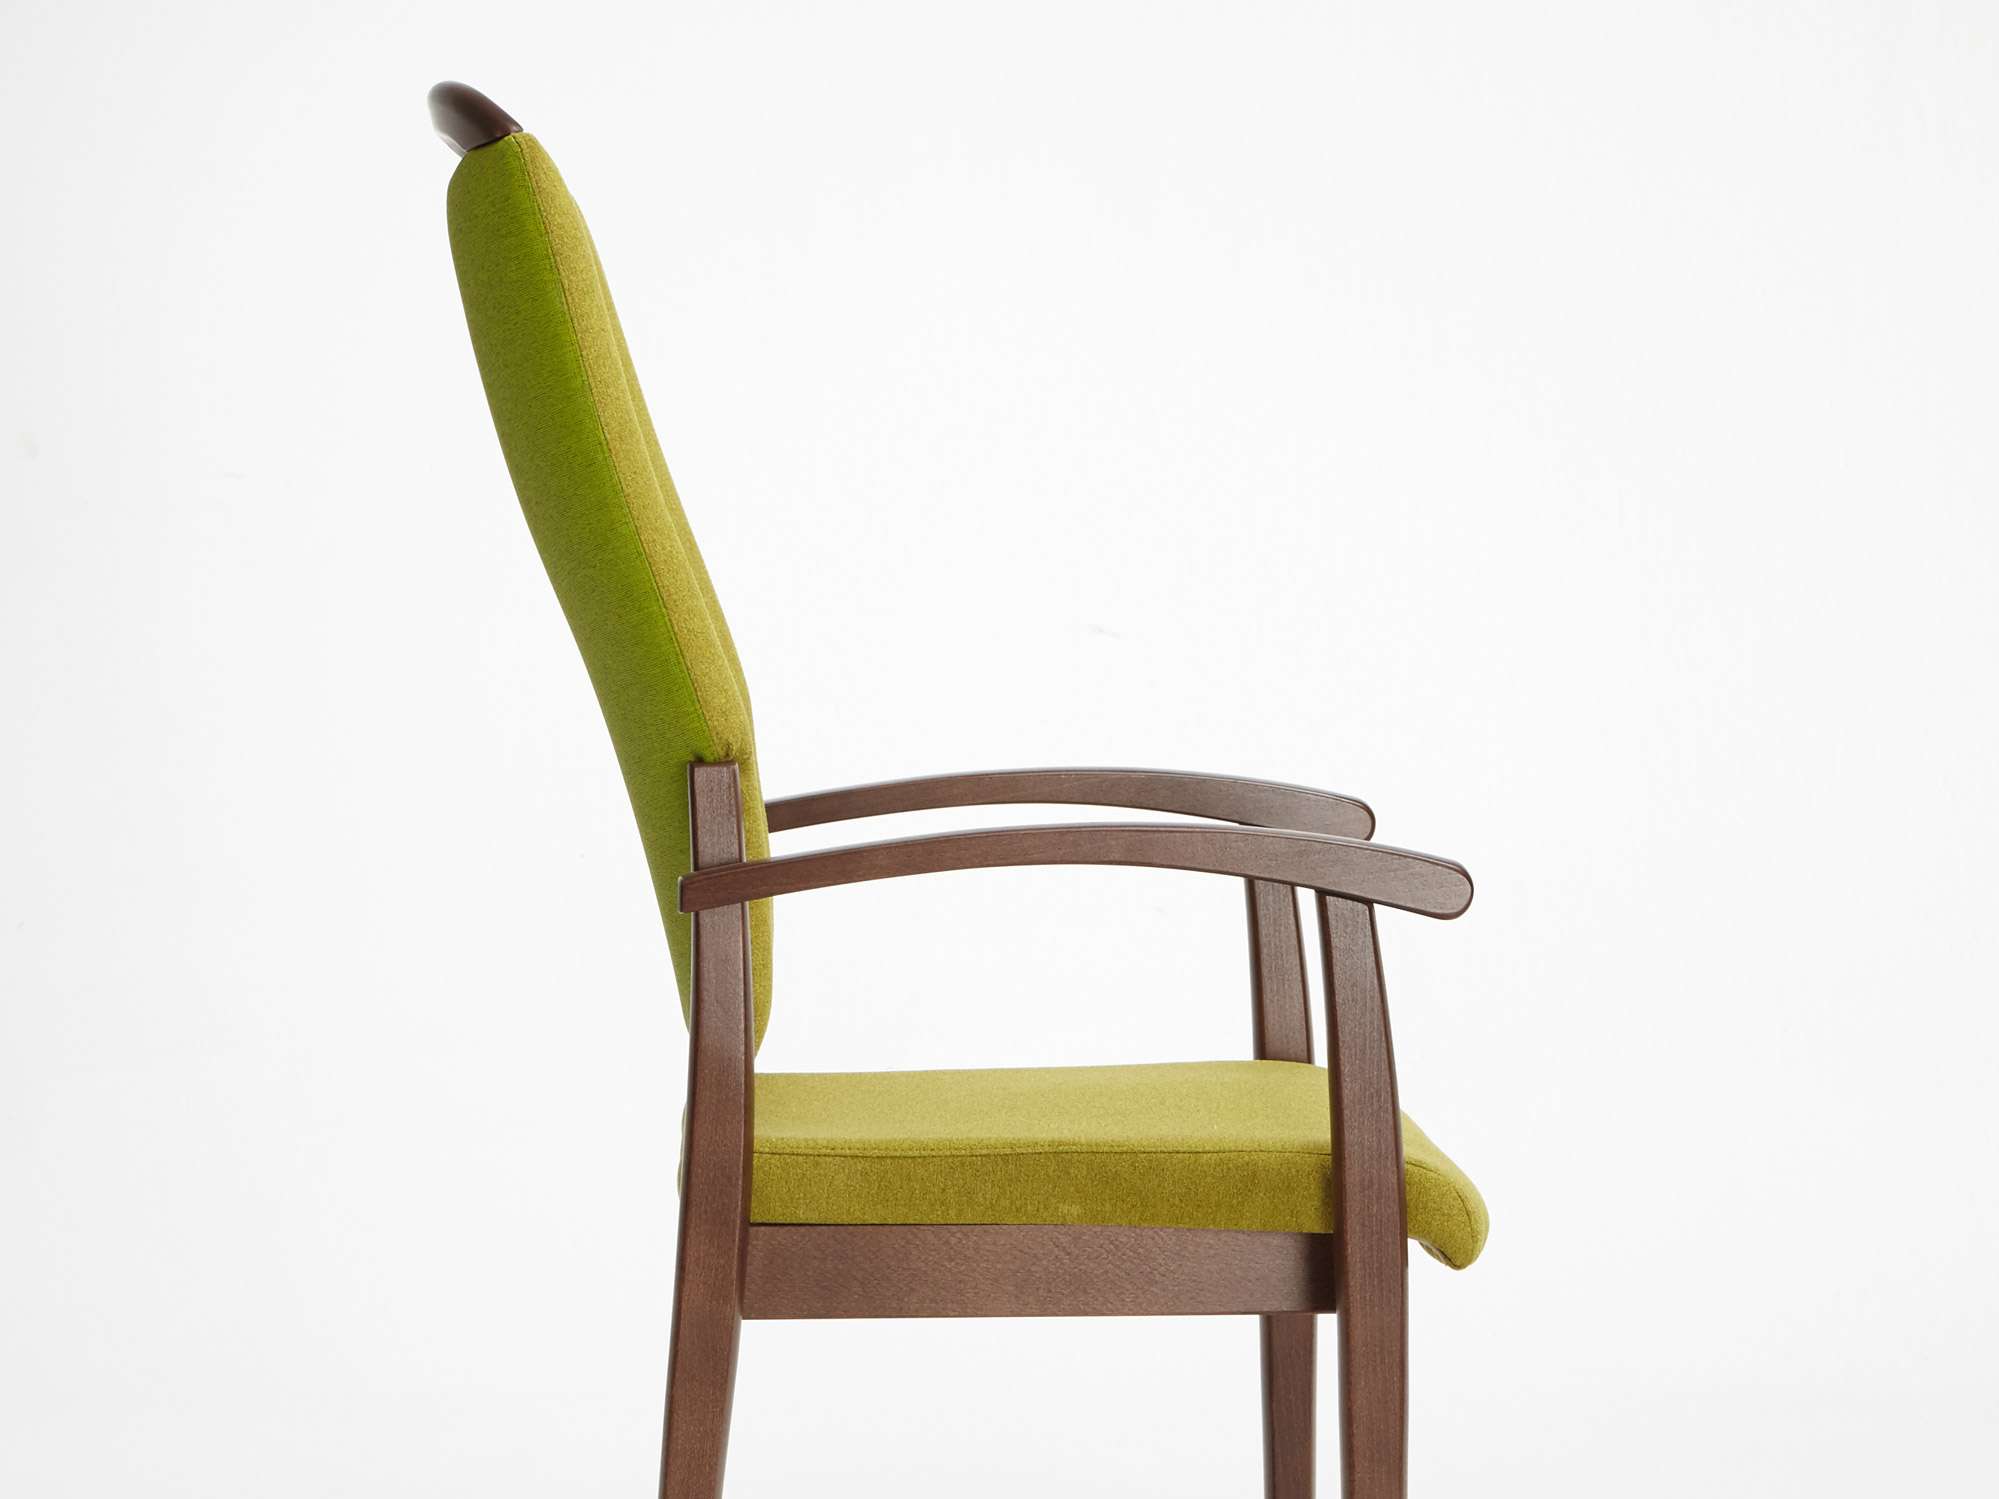 The Fena model as a high-back chair with handle